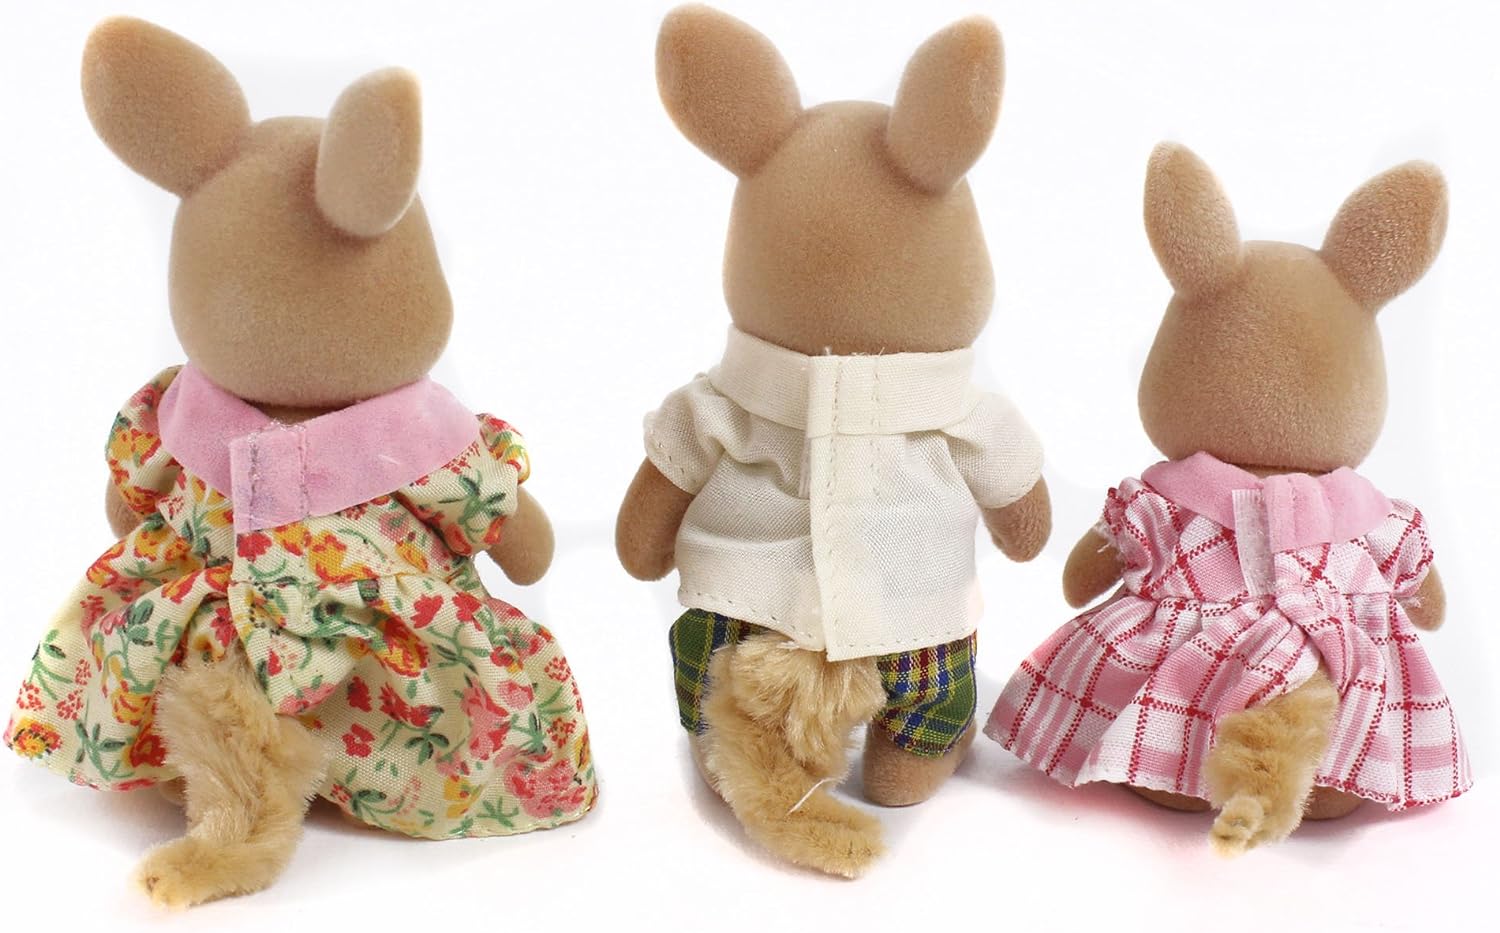 Calico Critters Hopper Kangaroo Family - Set of 4 Collectible Doll Figures for Children Ages 3+